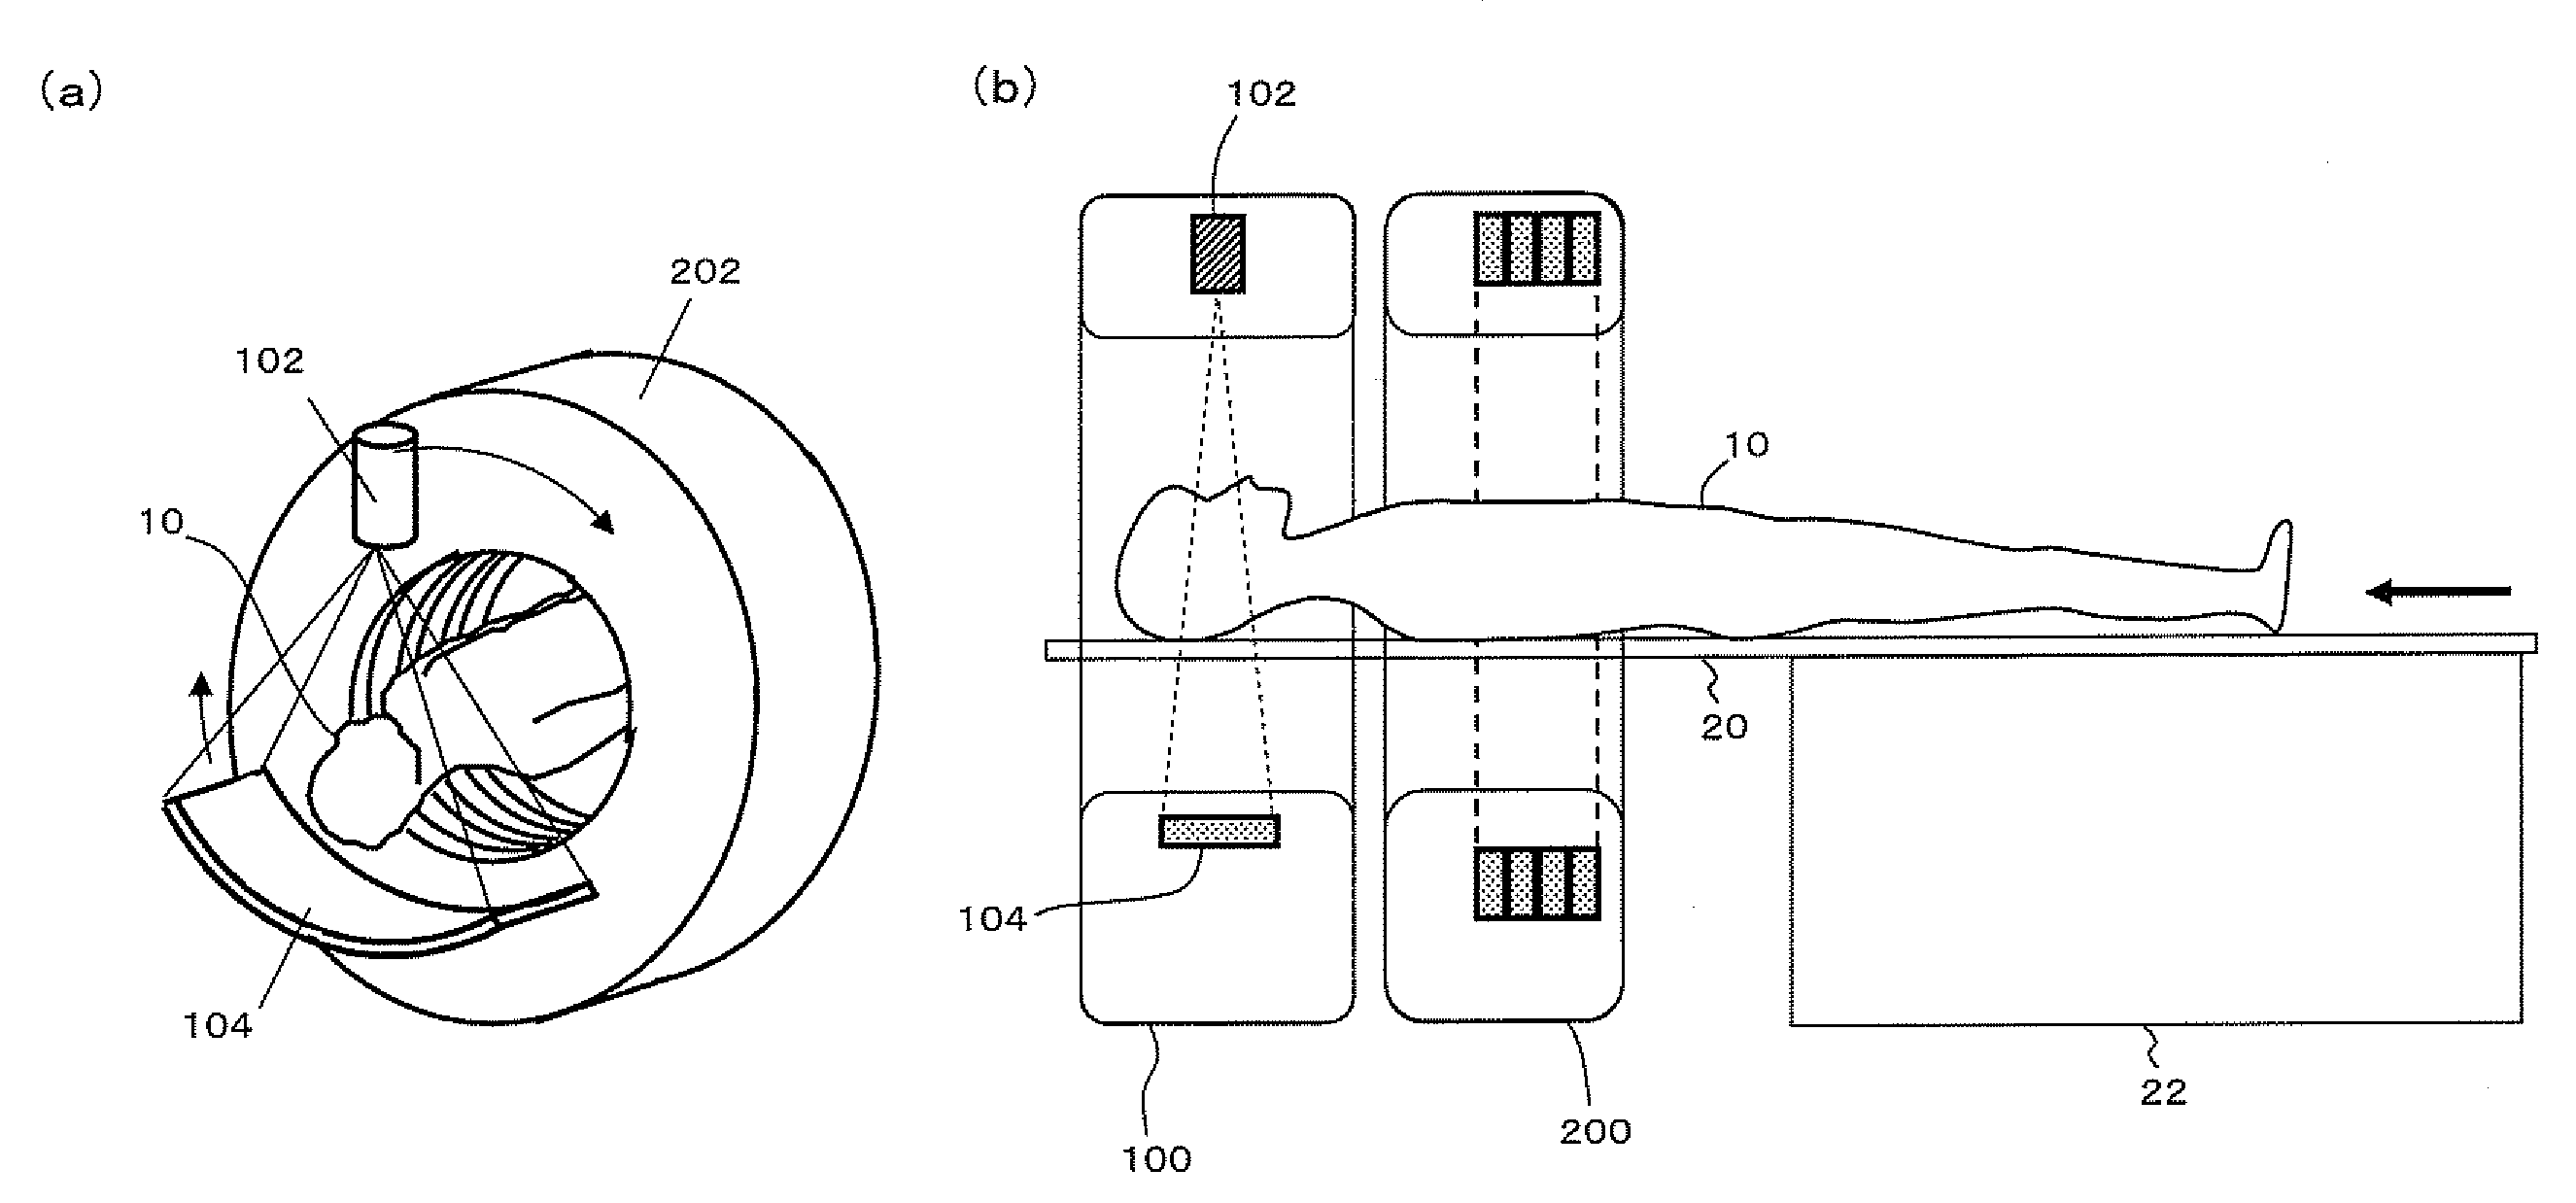 Pet/mri device, pet device, and image reconstruction system